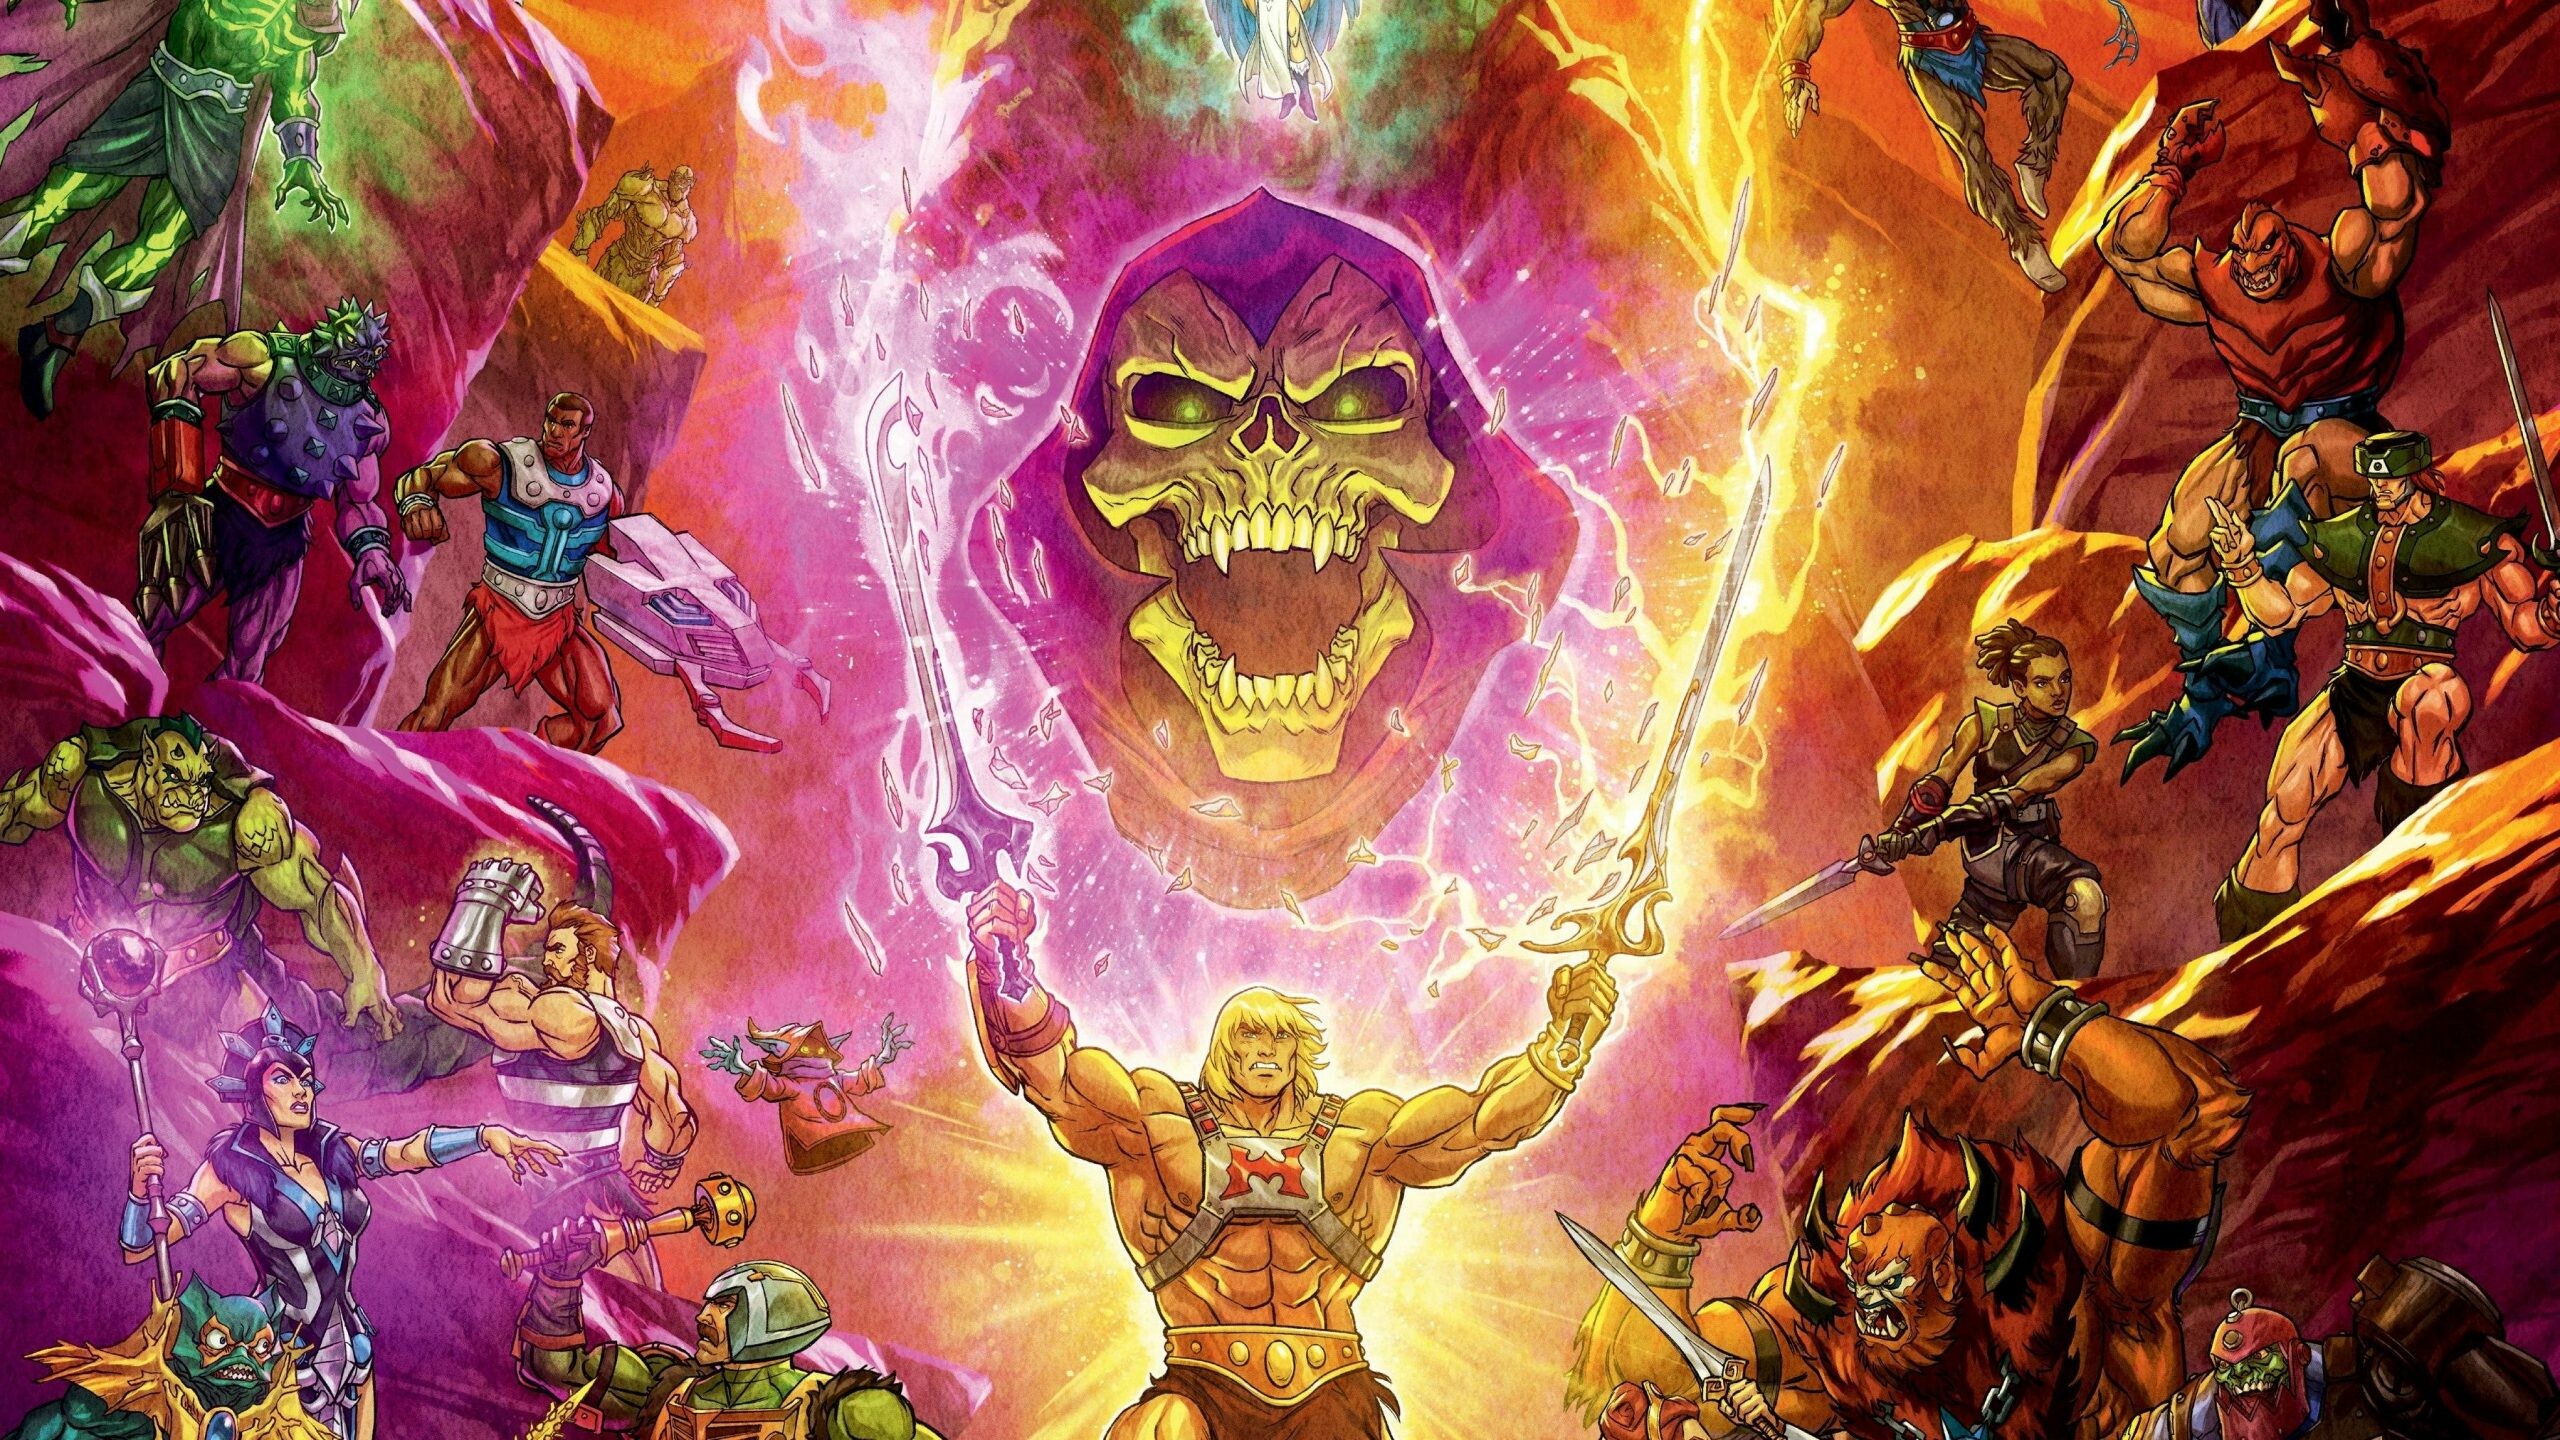 He-Man: The Masters of the Universe, The prince of the planet Eternia. 2560x1440 HD Wallpaper.